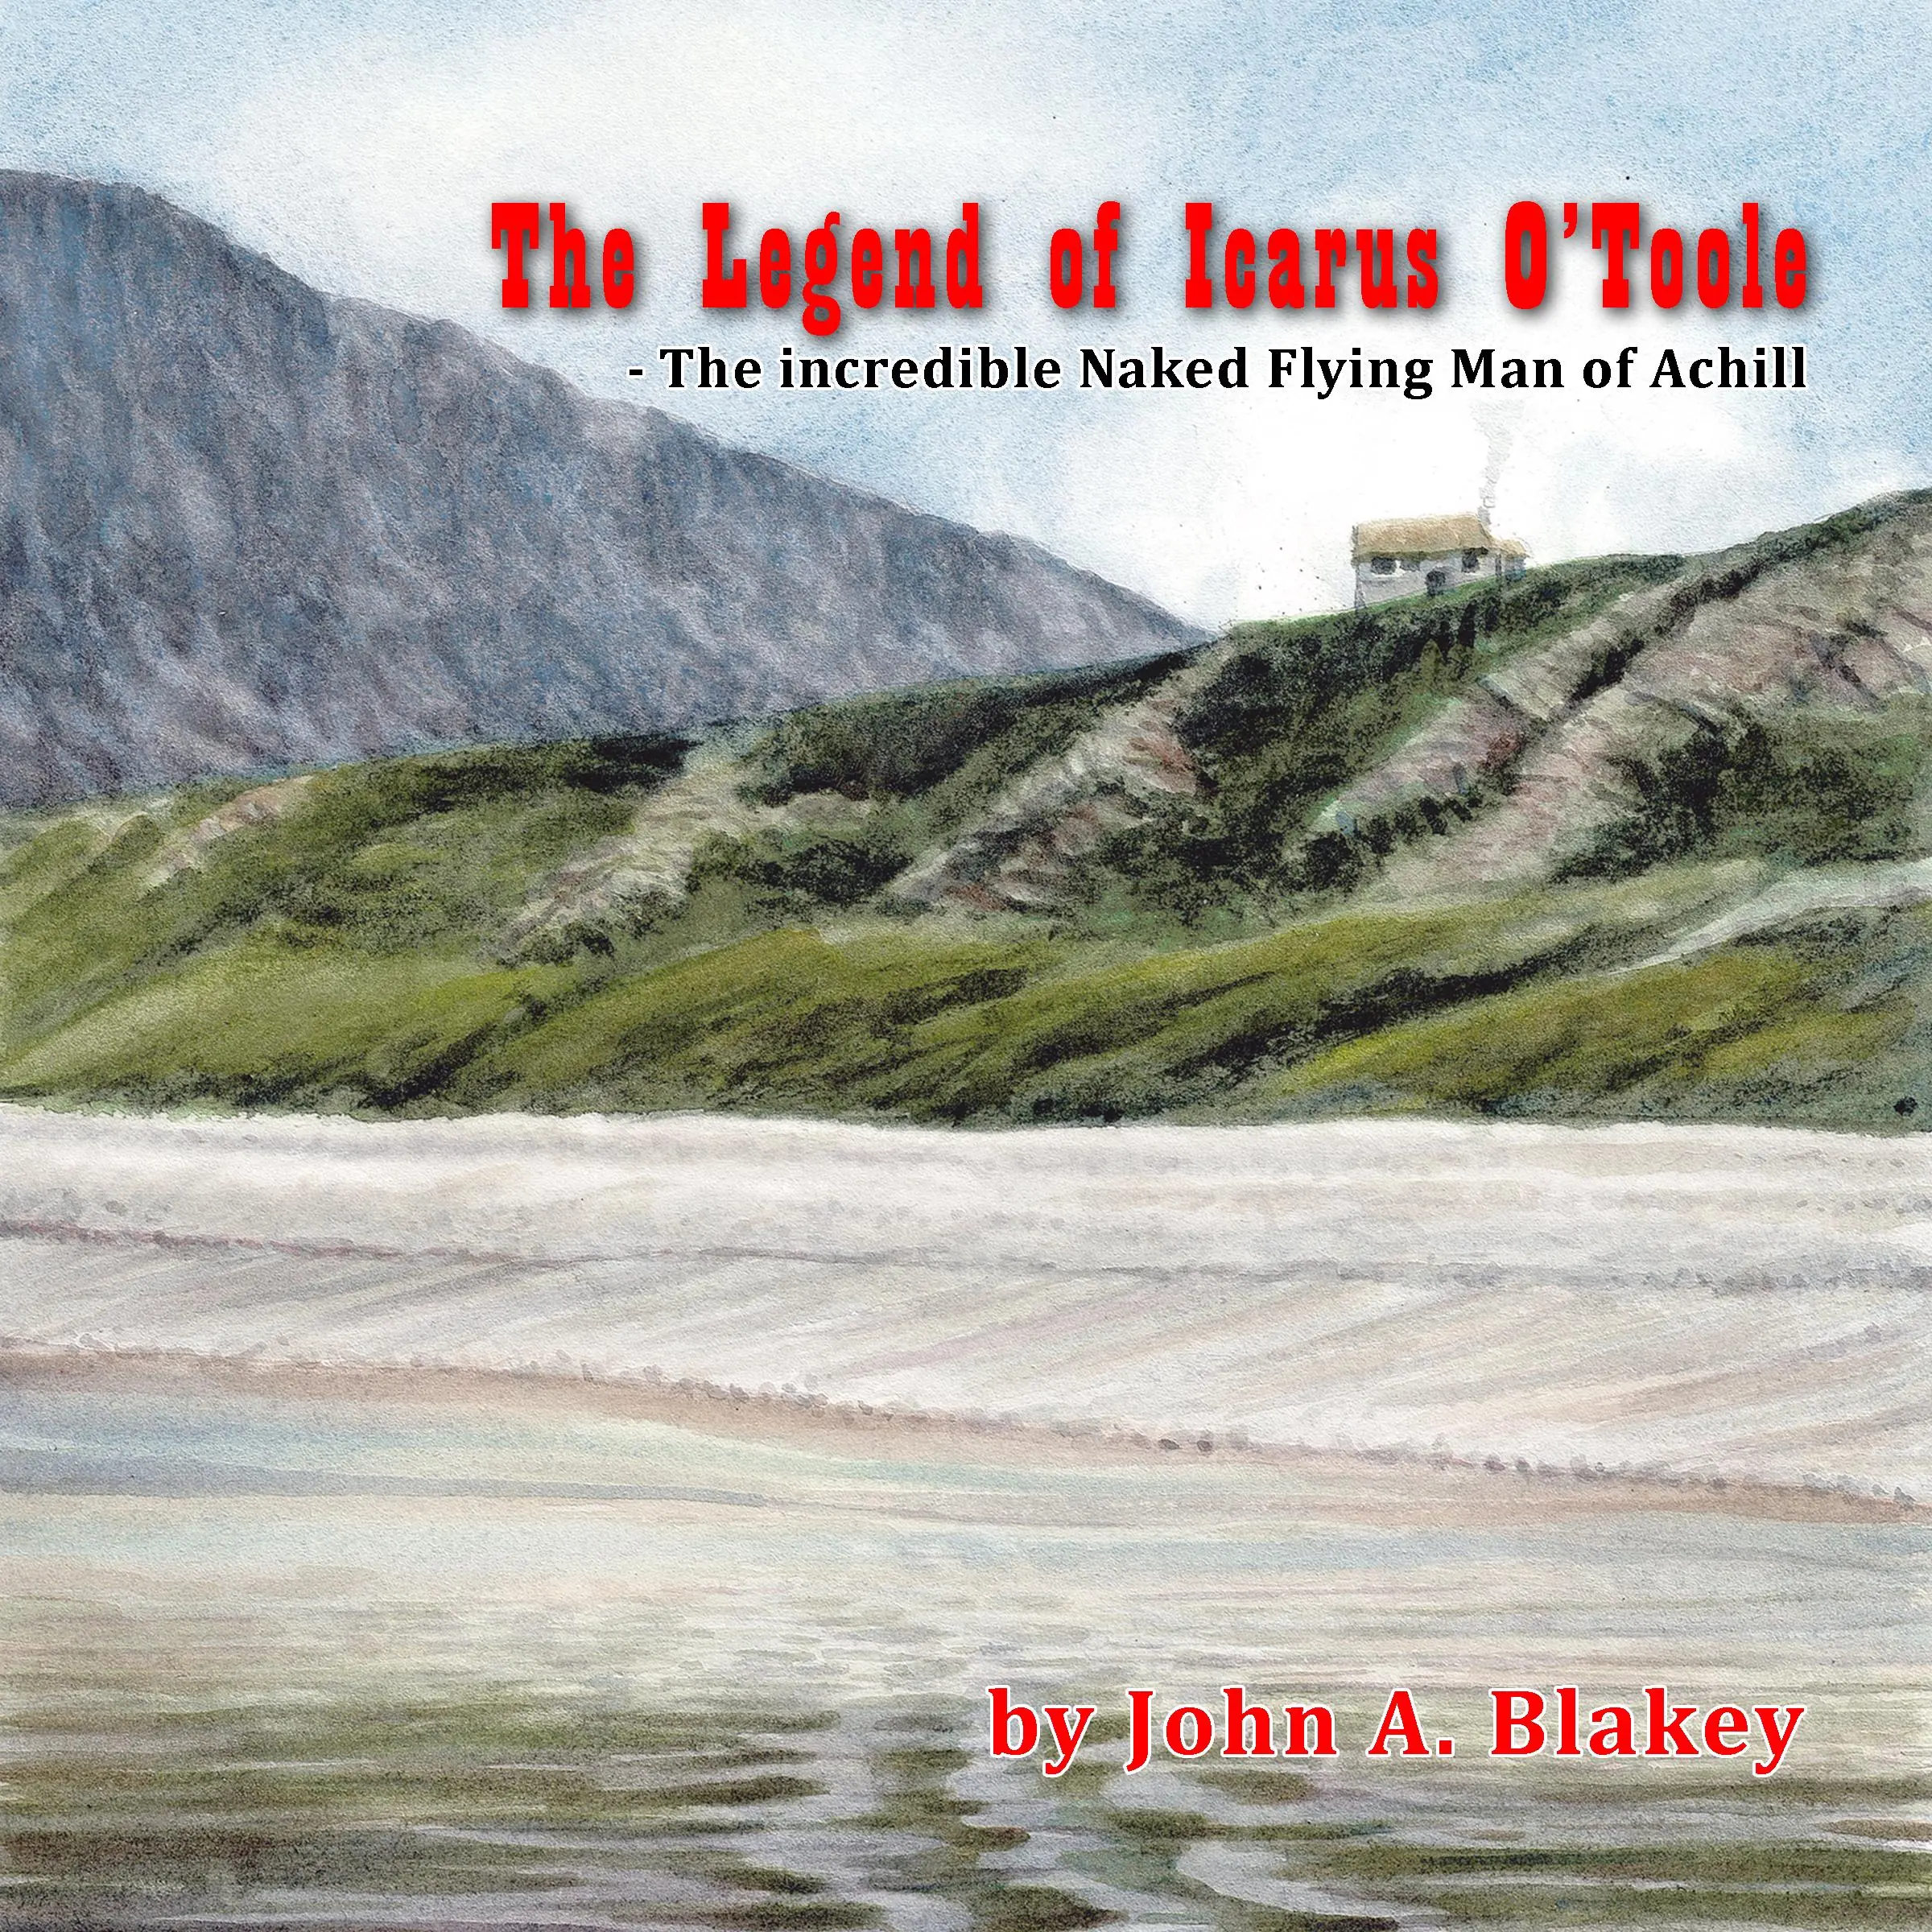 The Legend of Icarus O'Toole, The Incredible Naked Flying Man of Achill by John A. Blakey Audiobook